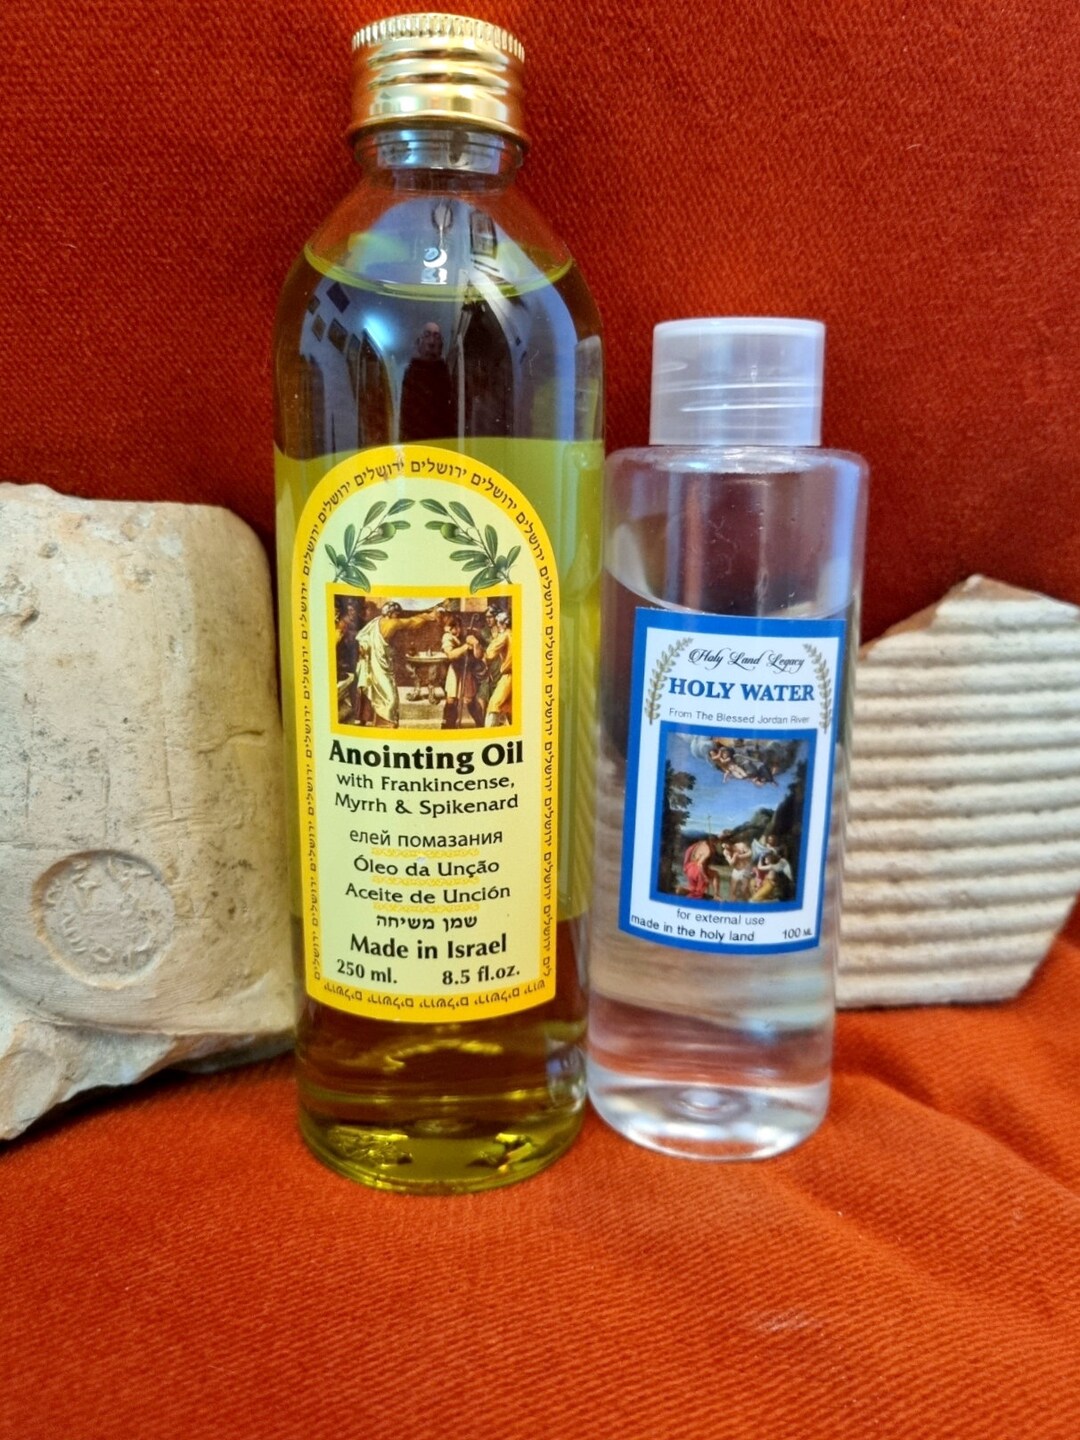 Oil of Gladness Anointing Oil, Frankincense and Myrrh